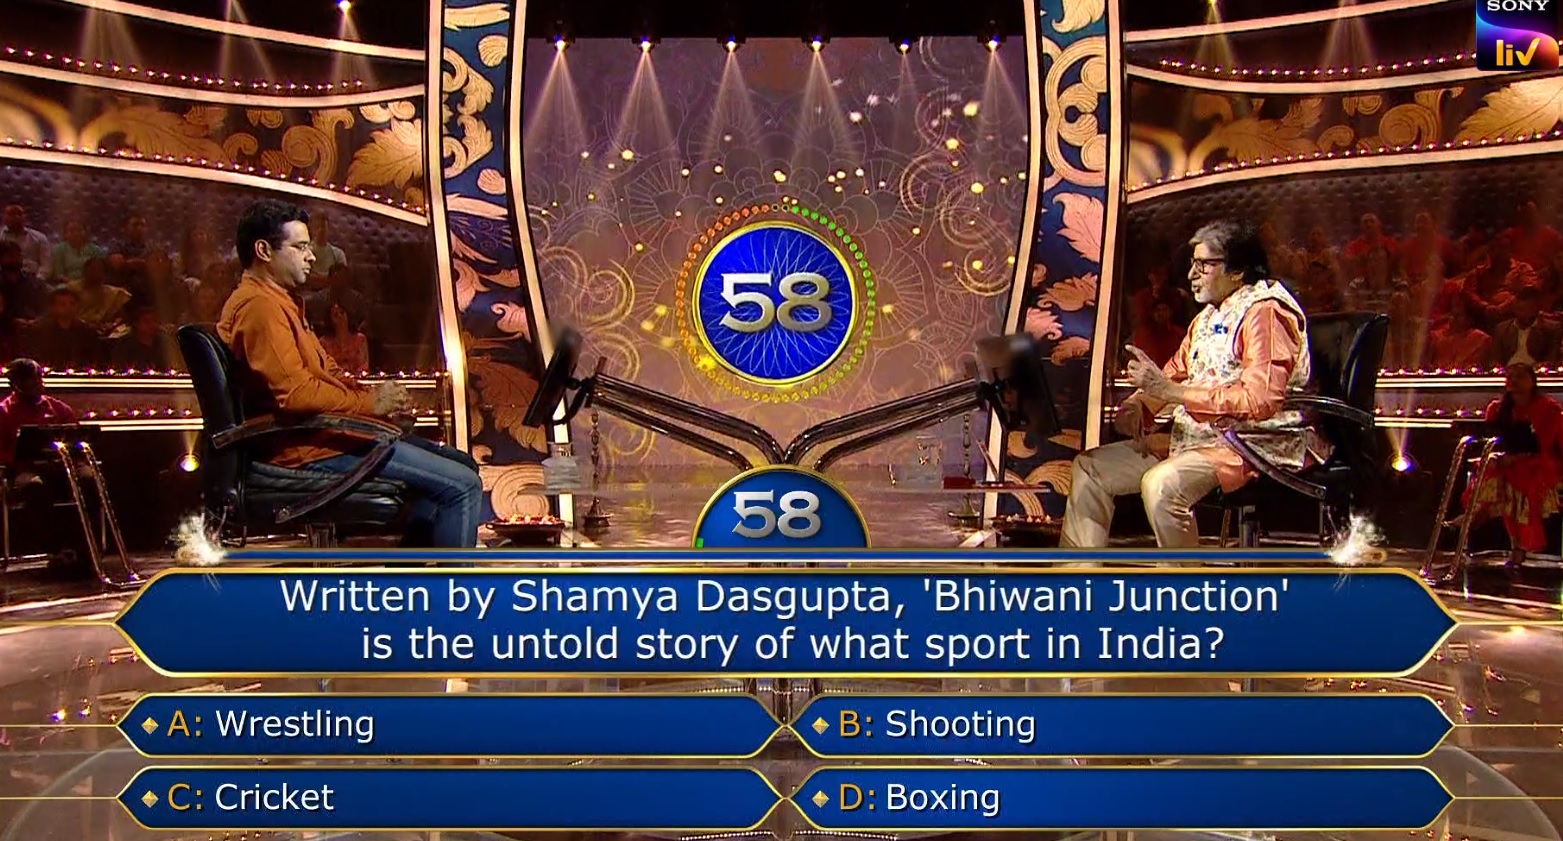 Ques : Written by Shamya Dasgupta, ‘Bhiwani Junction’ is the untold story of what sport in India?